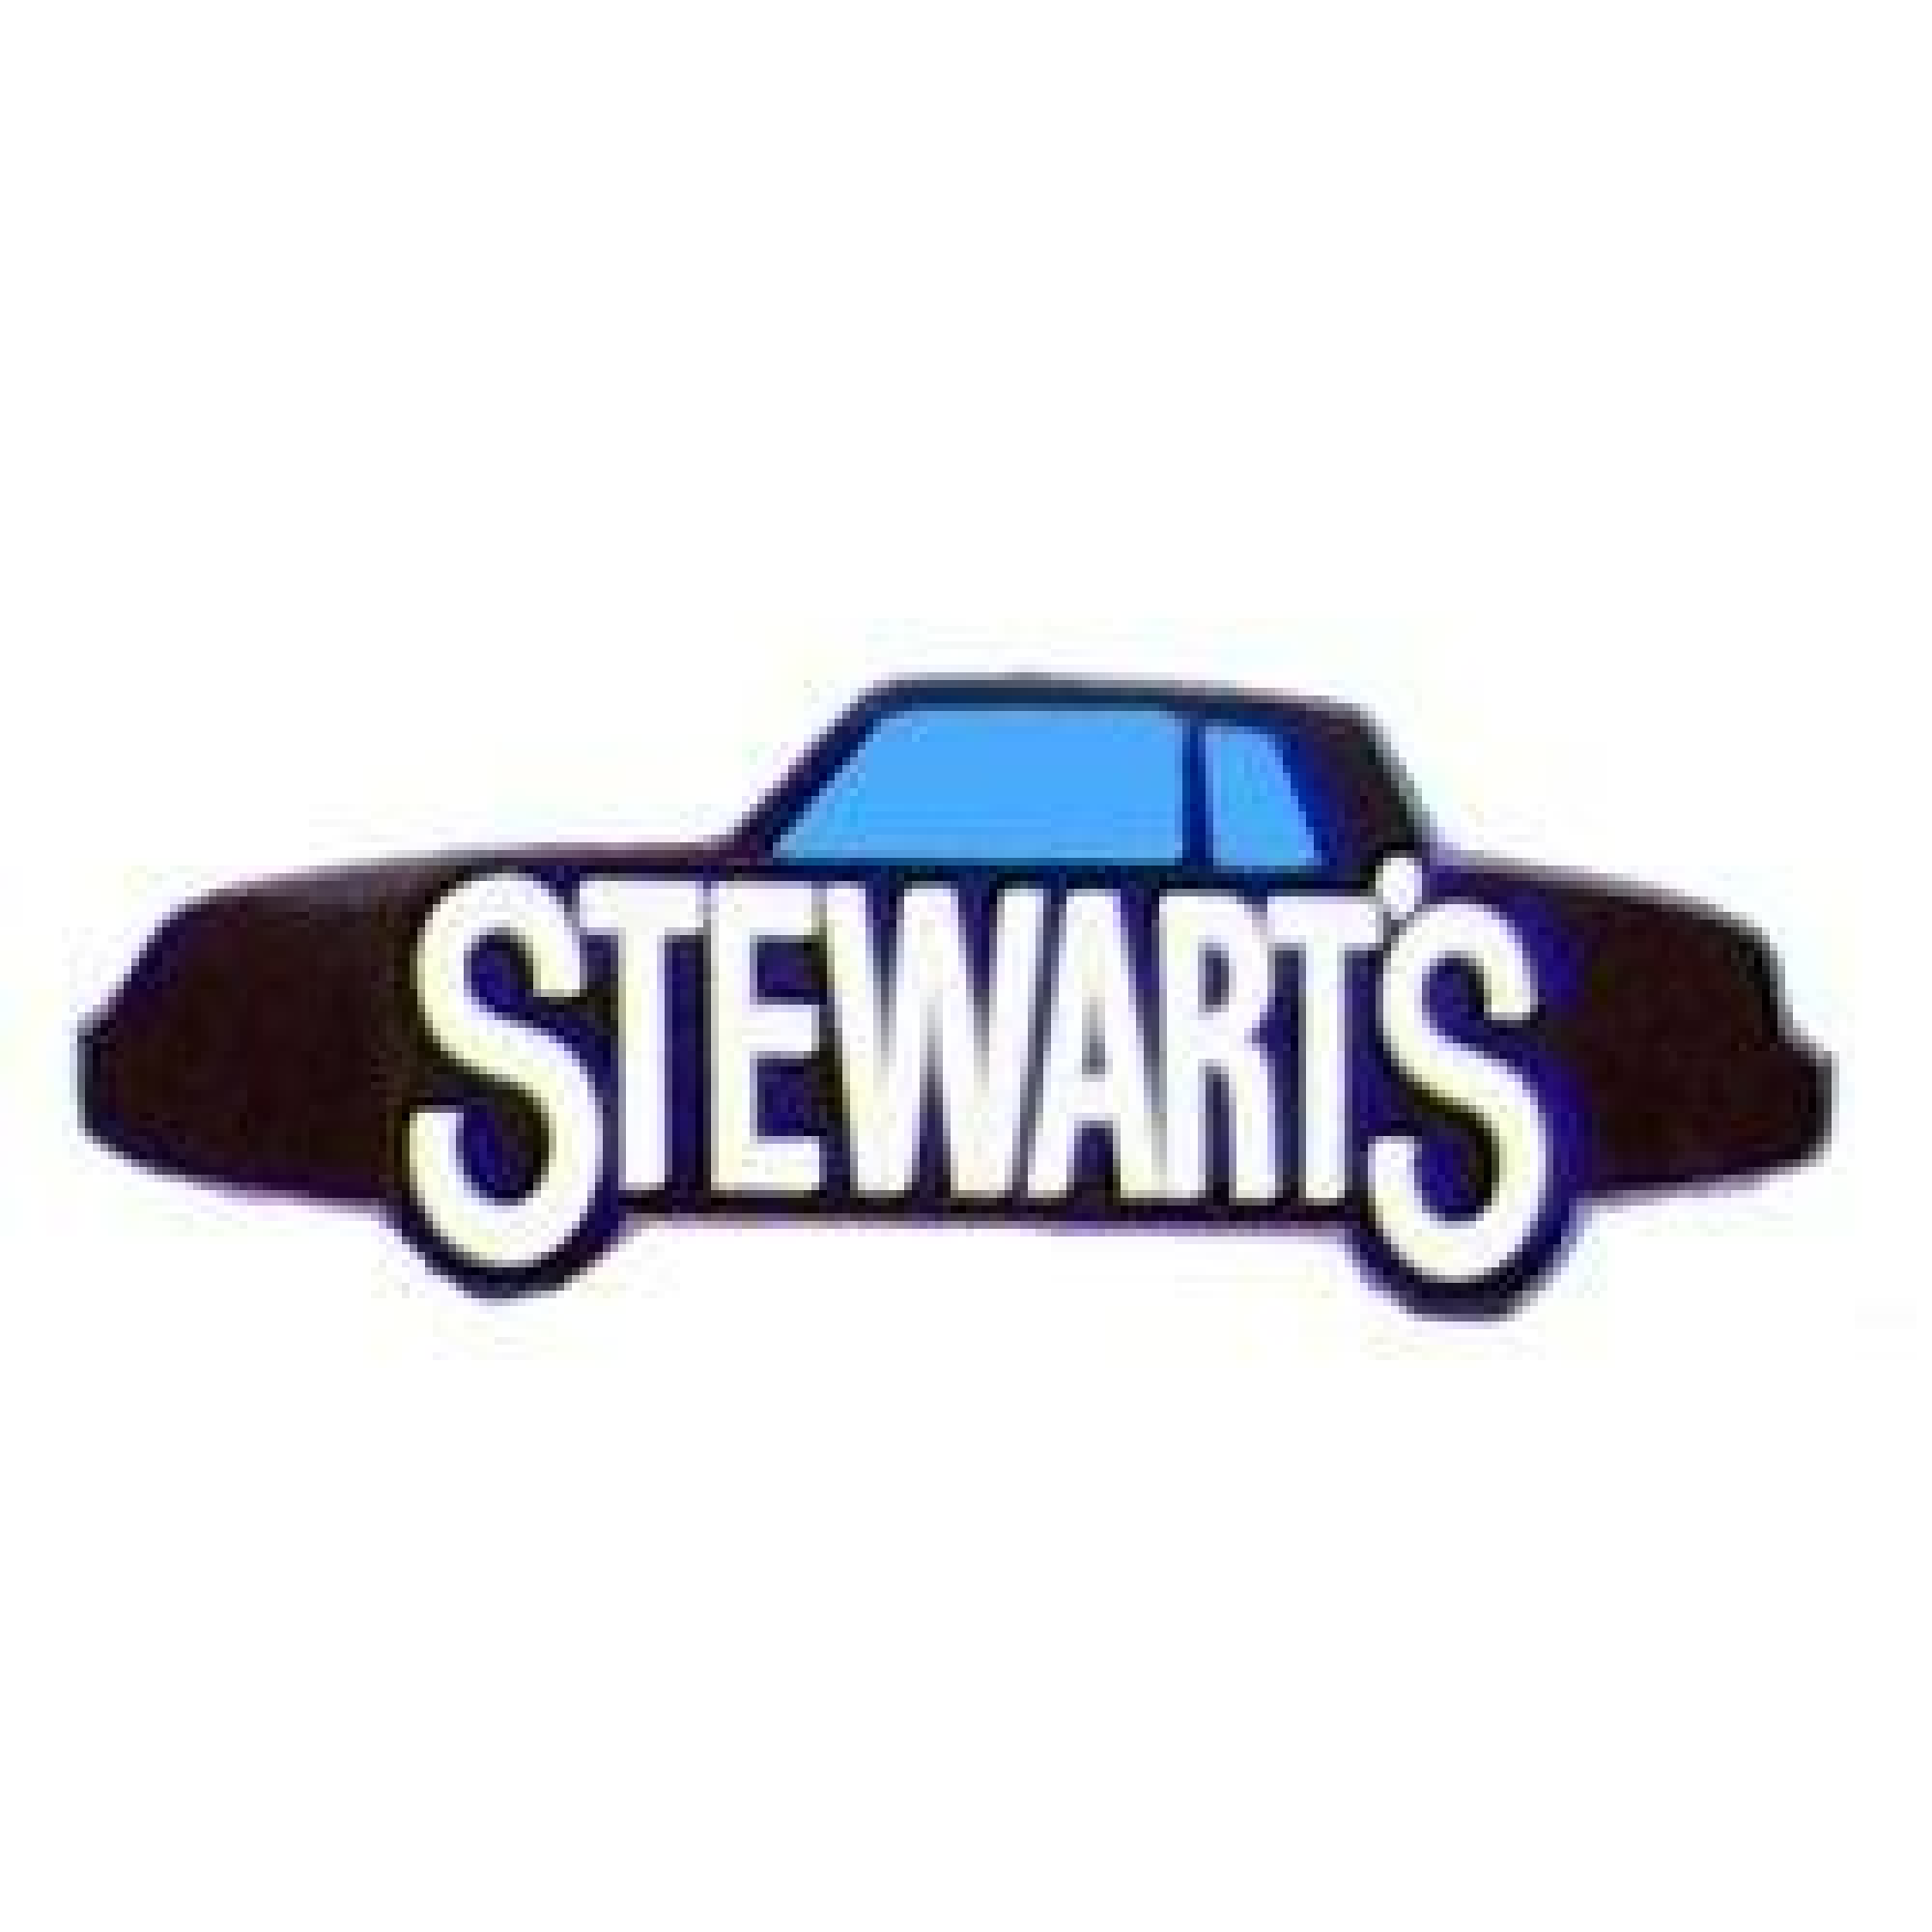 Stewarts Used Auto Parts, Inc. - Pleasant Valley, CT 06063 - (860)379-7541 | ShowMeLocal.com